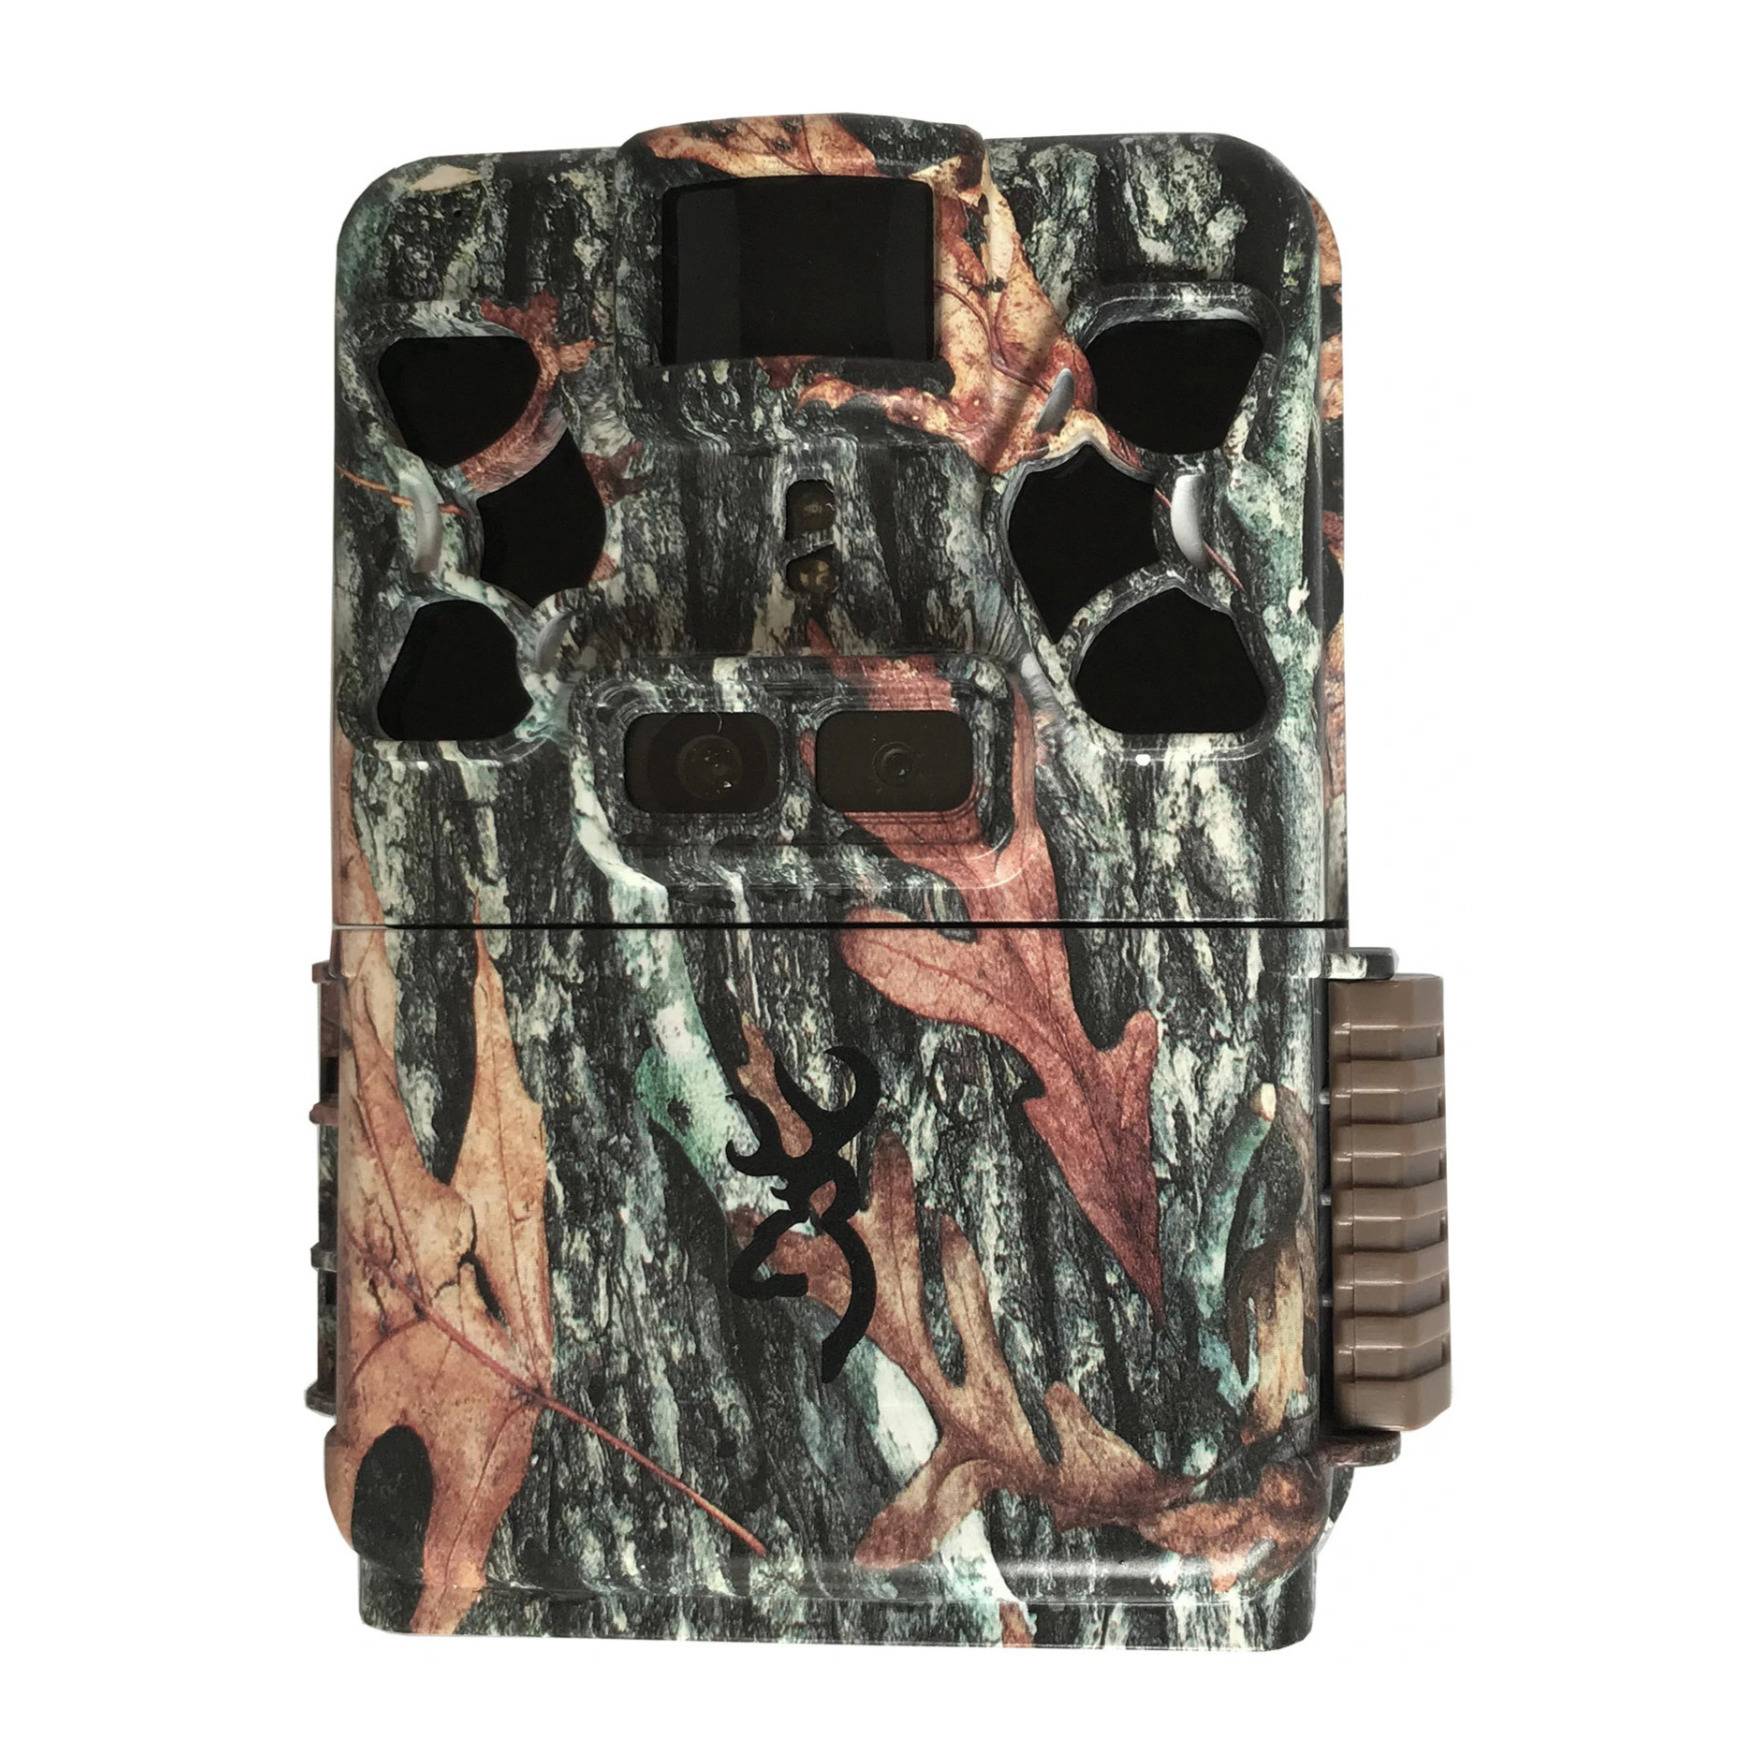 Browning Trail Cameras 24MP Recon Force Patriot Trail Camera